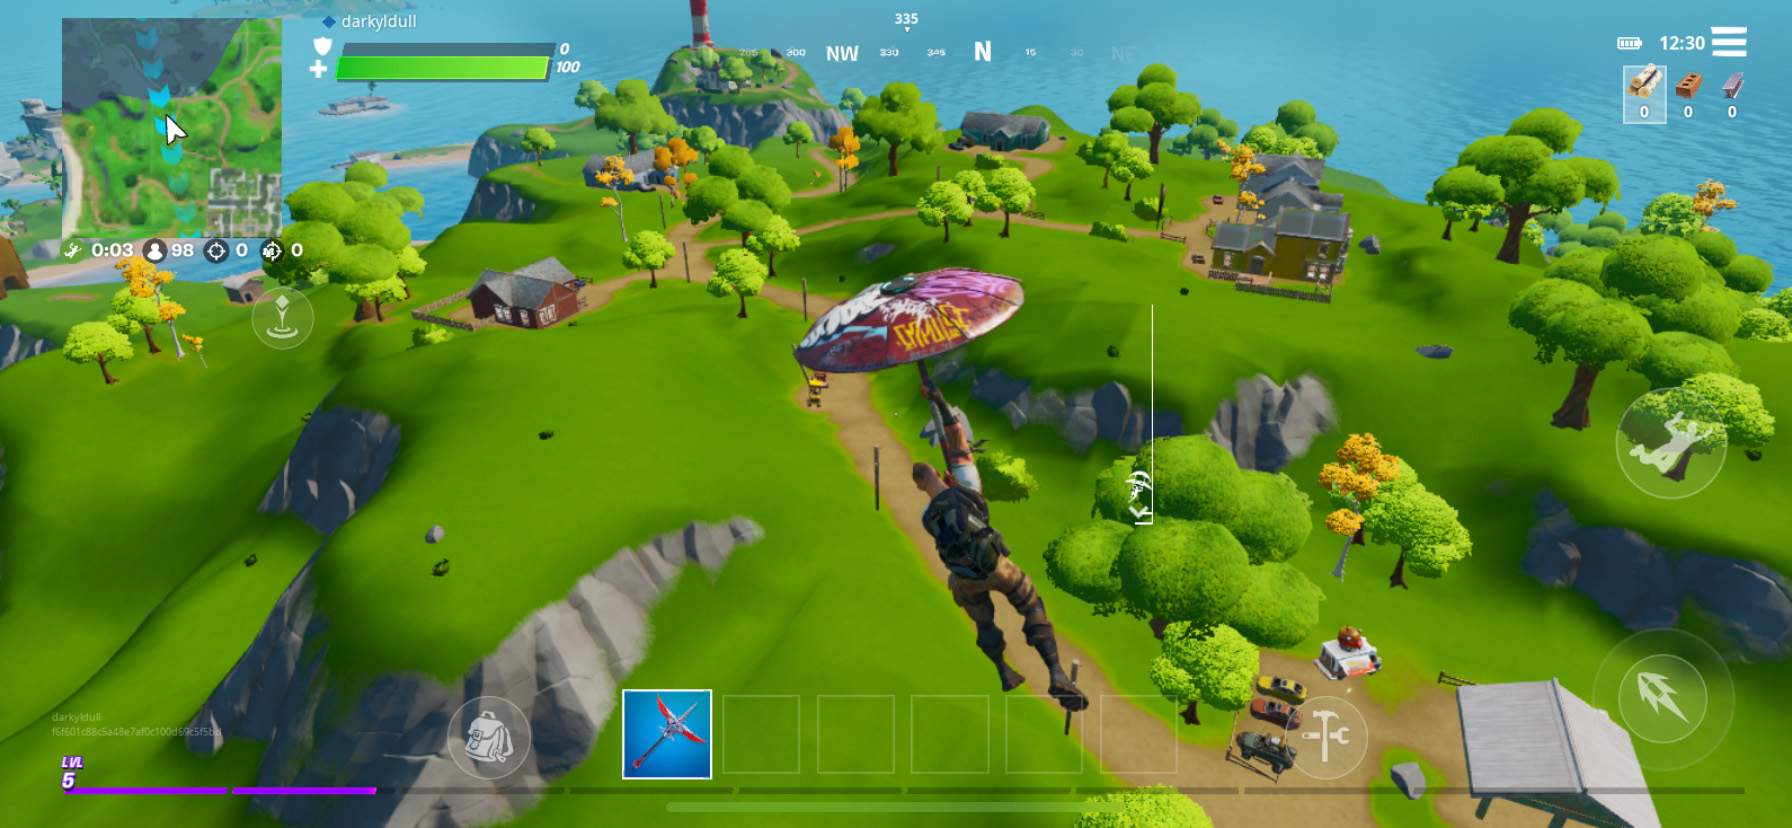 Fortnite on Google Play Store: How to download, some helpful tips to win a  match